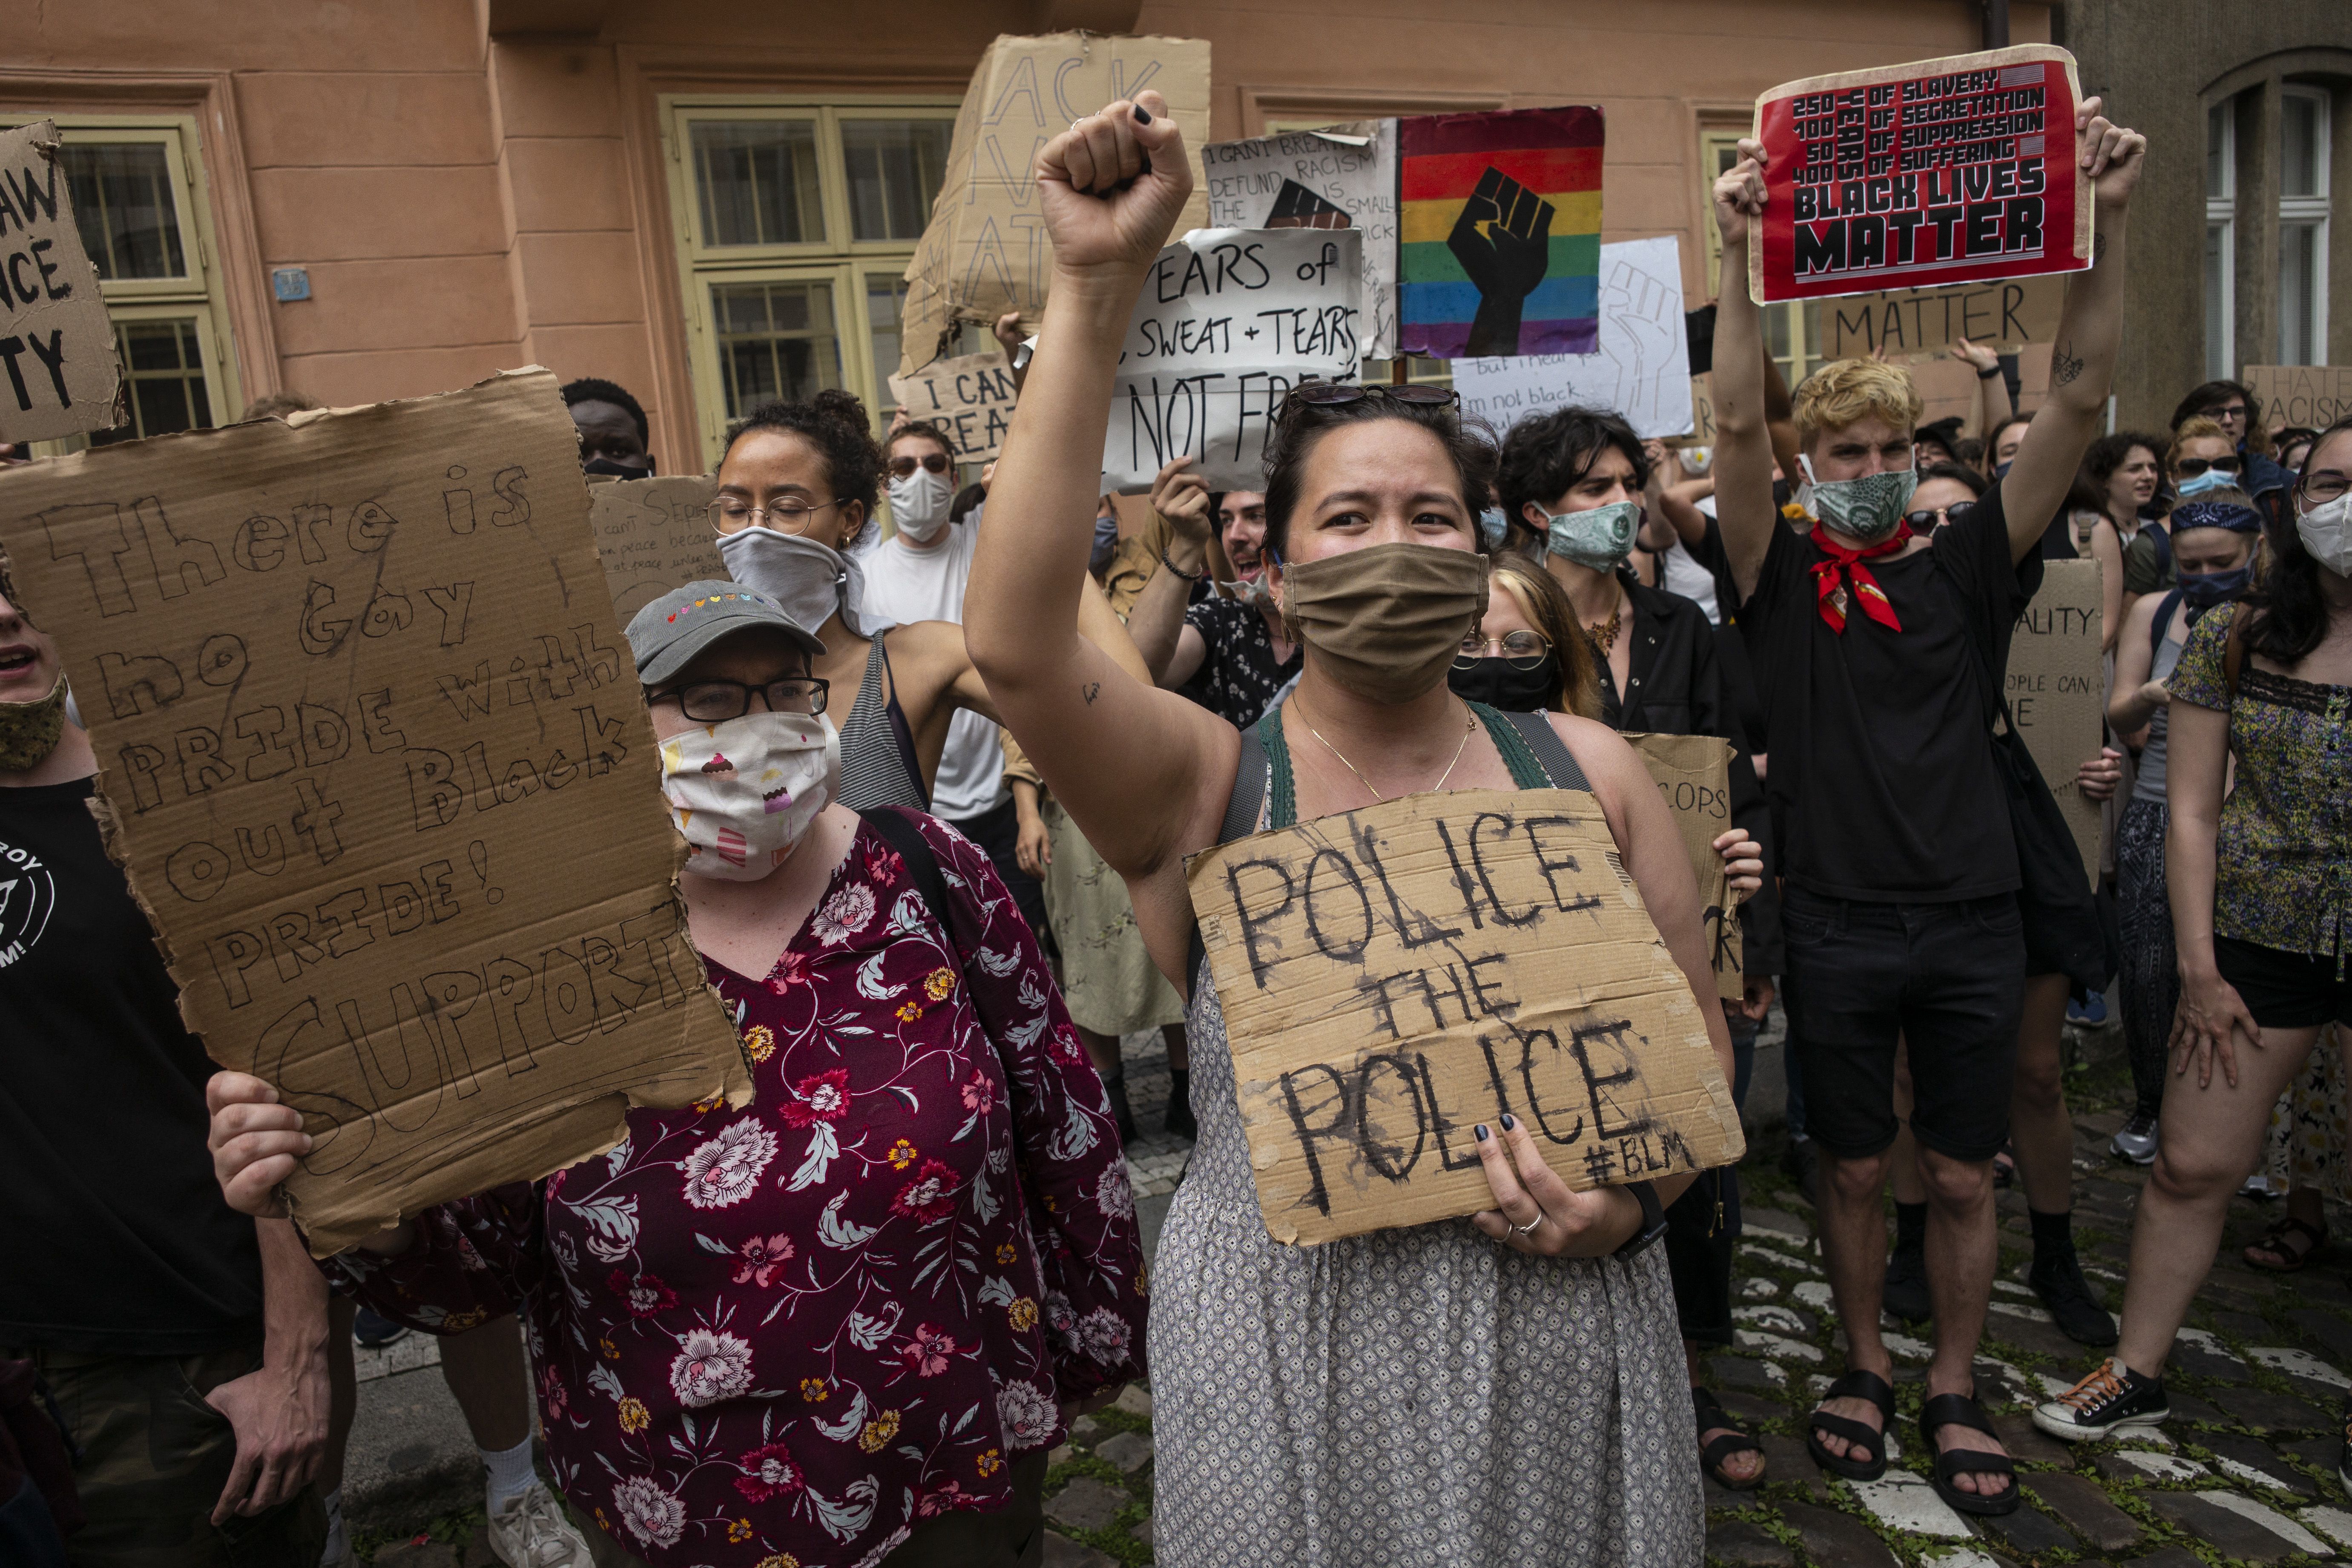 A masked woman holds a sign that reads "police the police" 